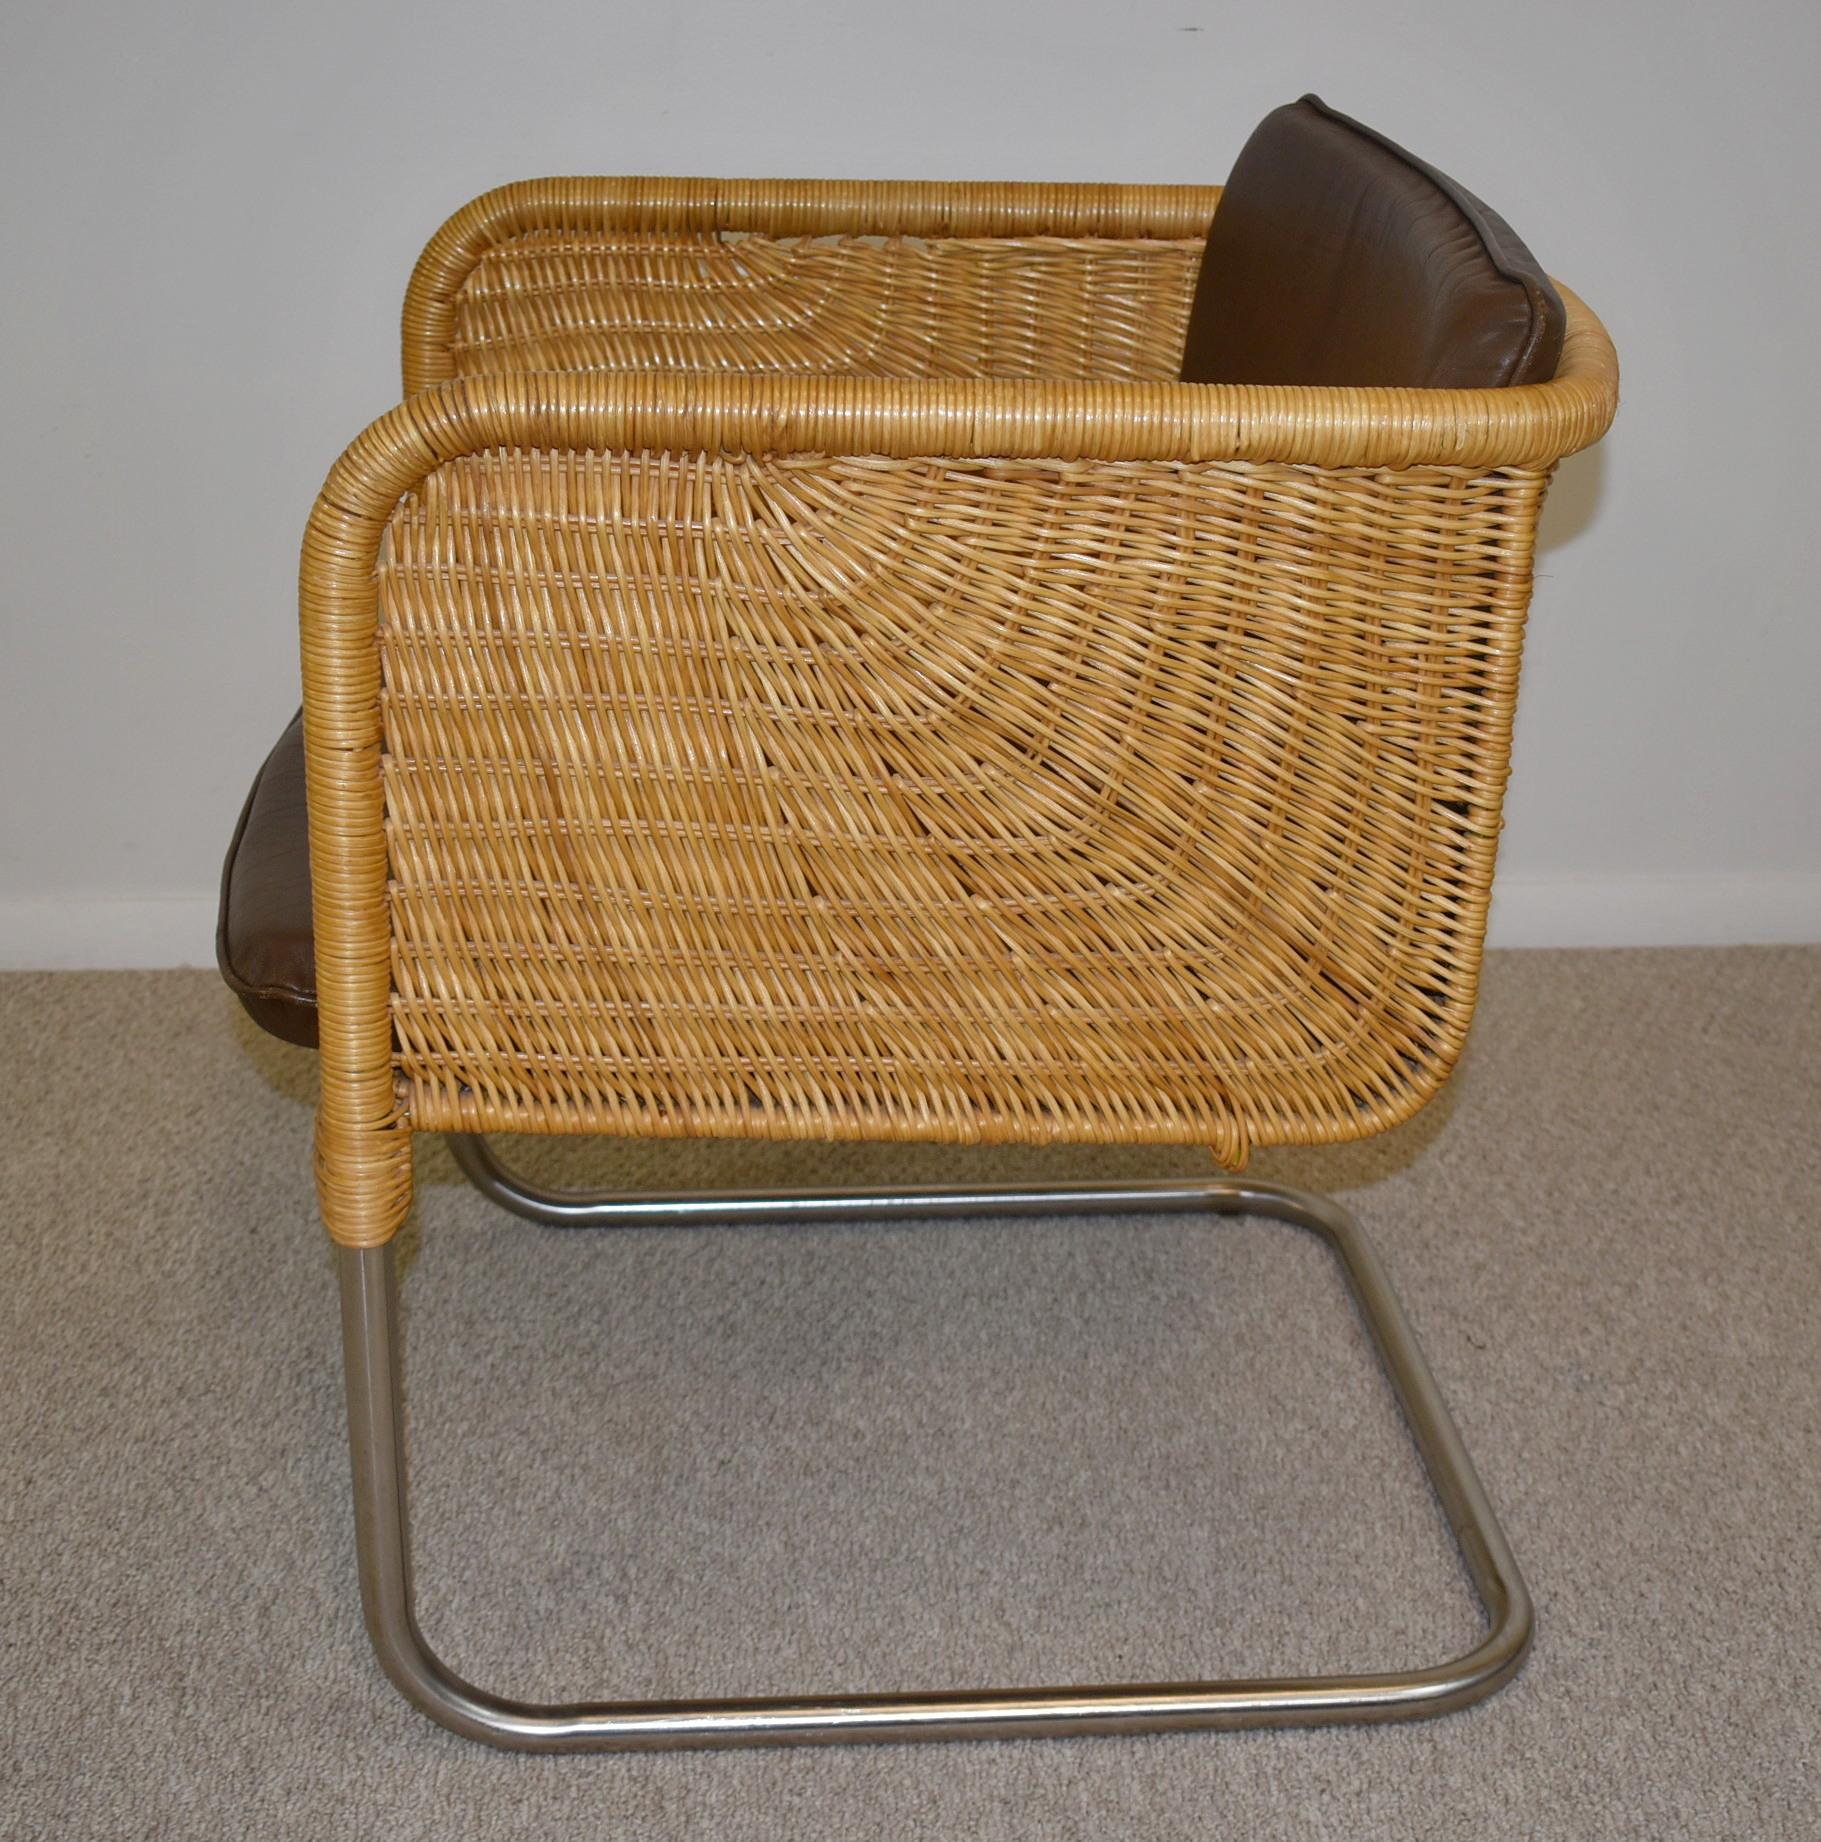 Modern Pair Vintage Harvey Probber Wicker & Chrome Chairs Leather Cushions D43 Model For Sale